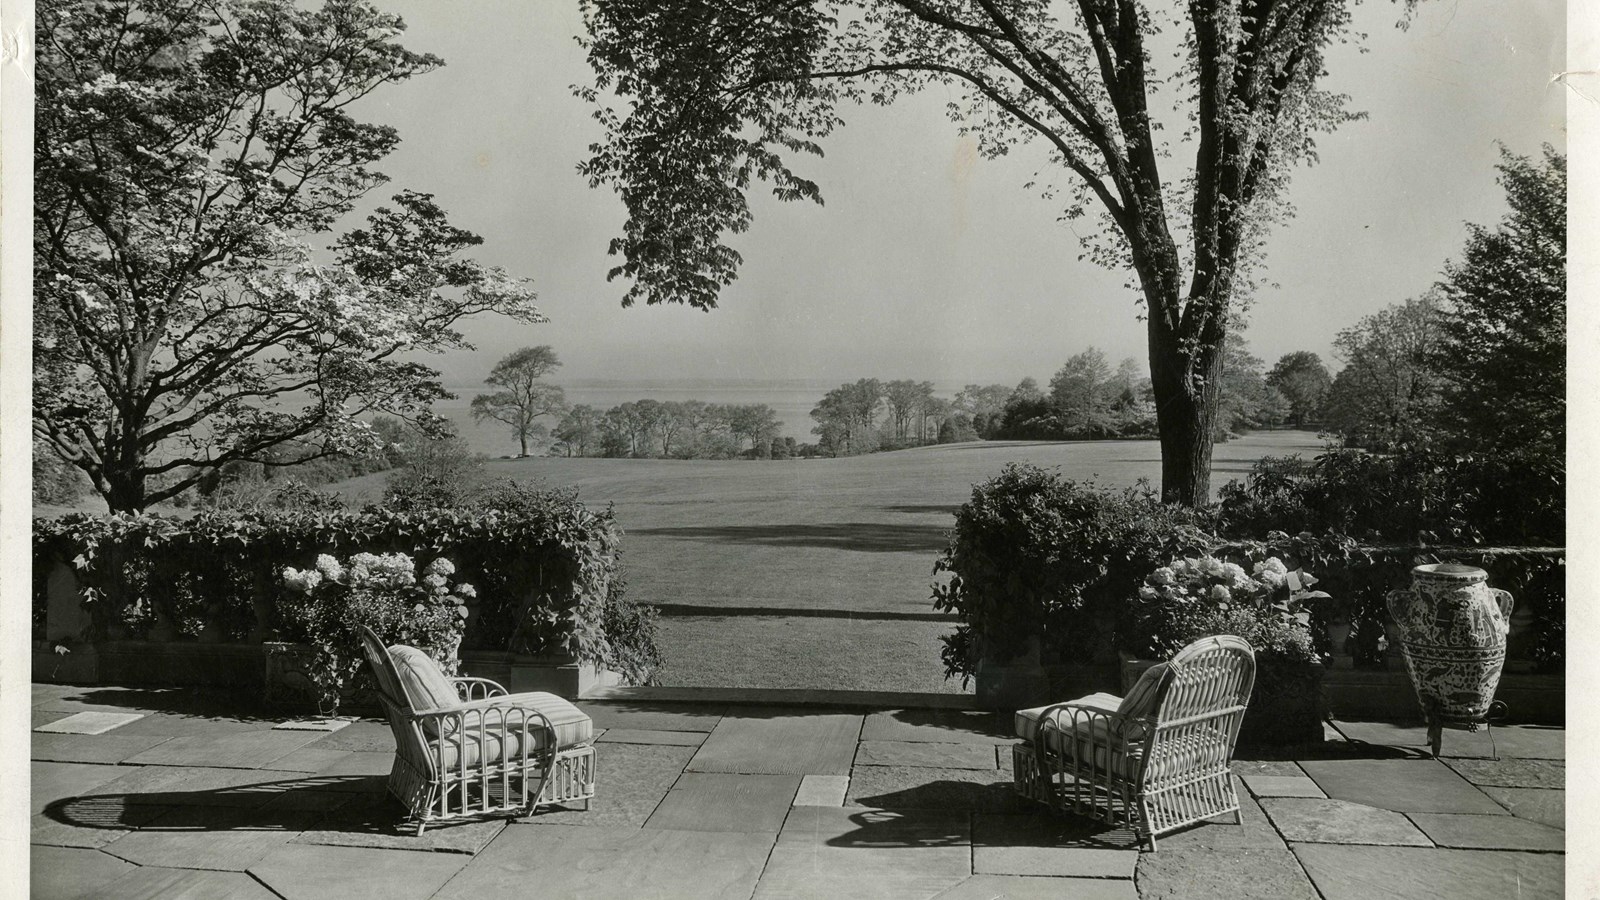 Black and white of two chairs on brick patio facing large flat open grassy area, trees on edge